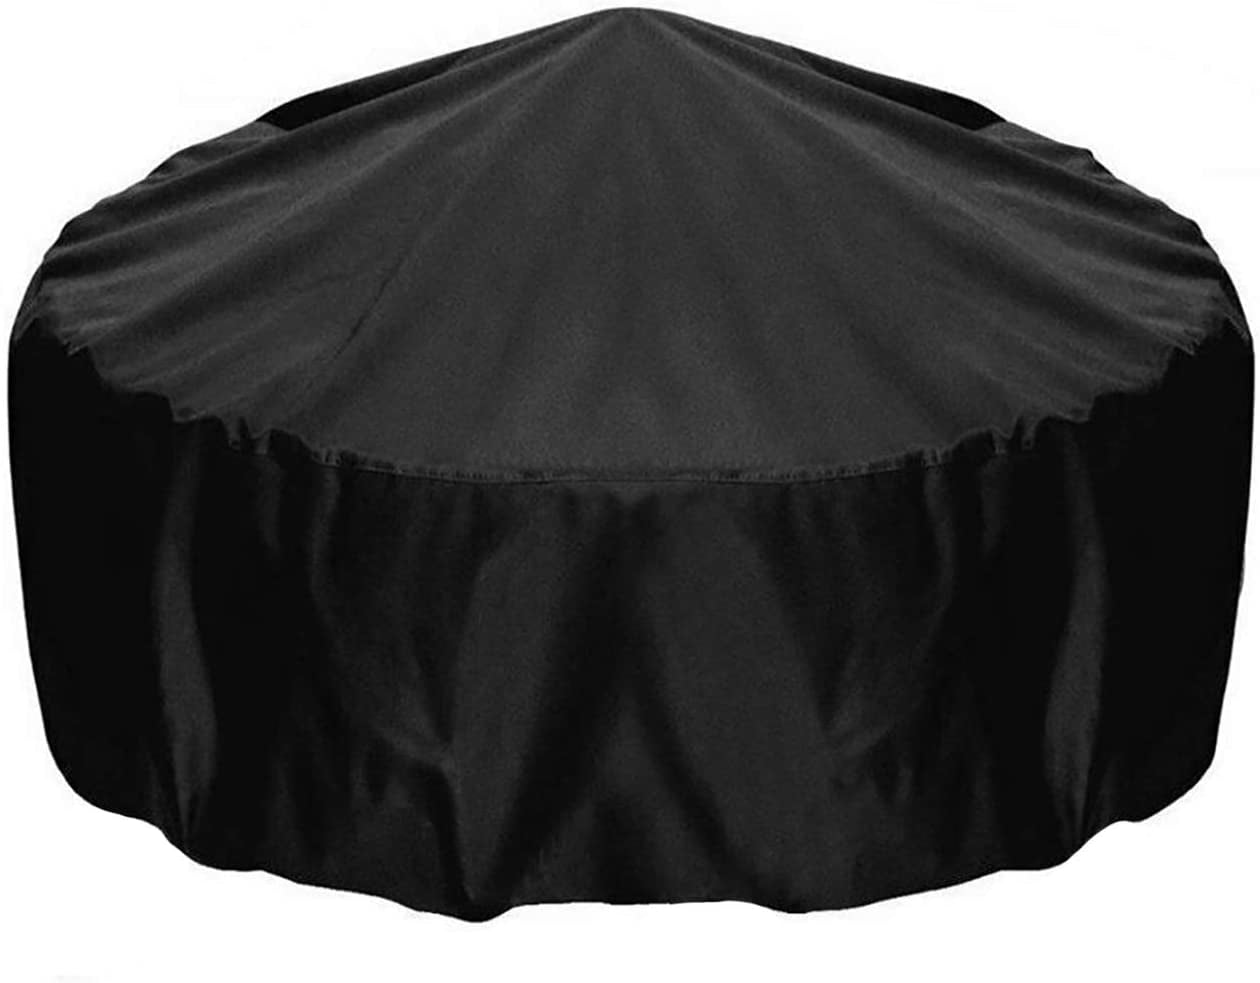 Round ,34 Inch Heavy Duty Waterproof BBQ Cover,Gas with Dust & Water Resistant,Weather Resistant